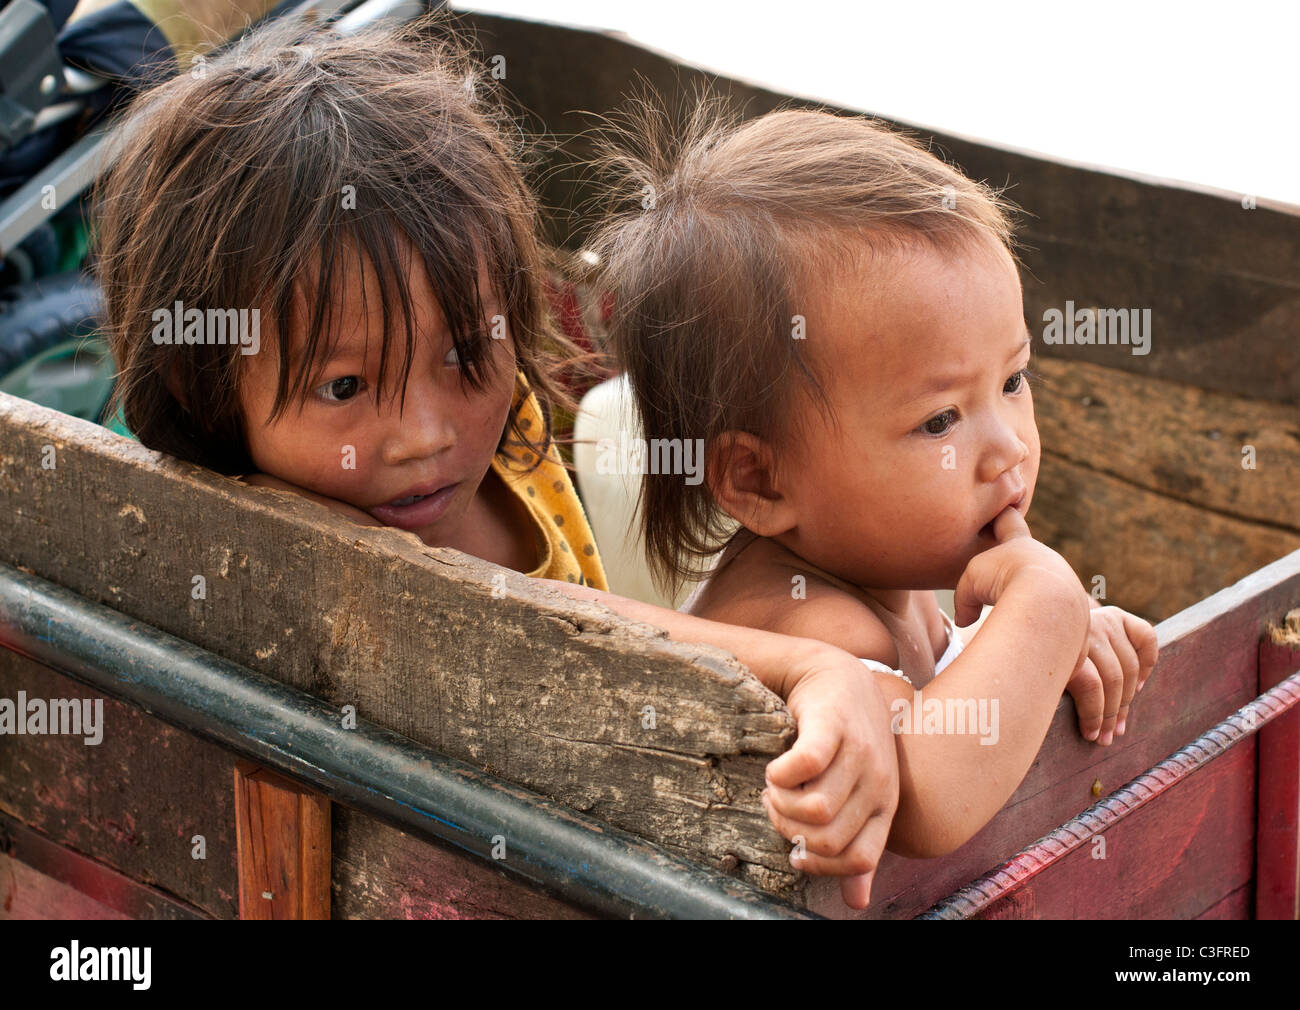 Two young Cambodian girls in a scavengers cart, Siem reap, Cambodia Stock Photo